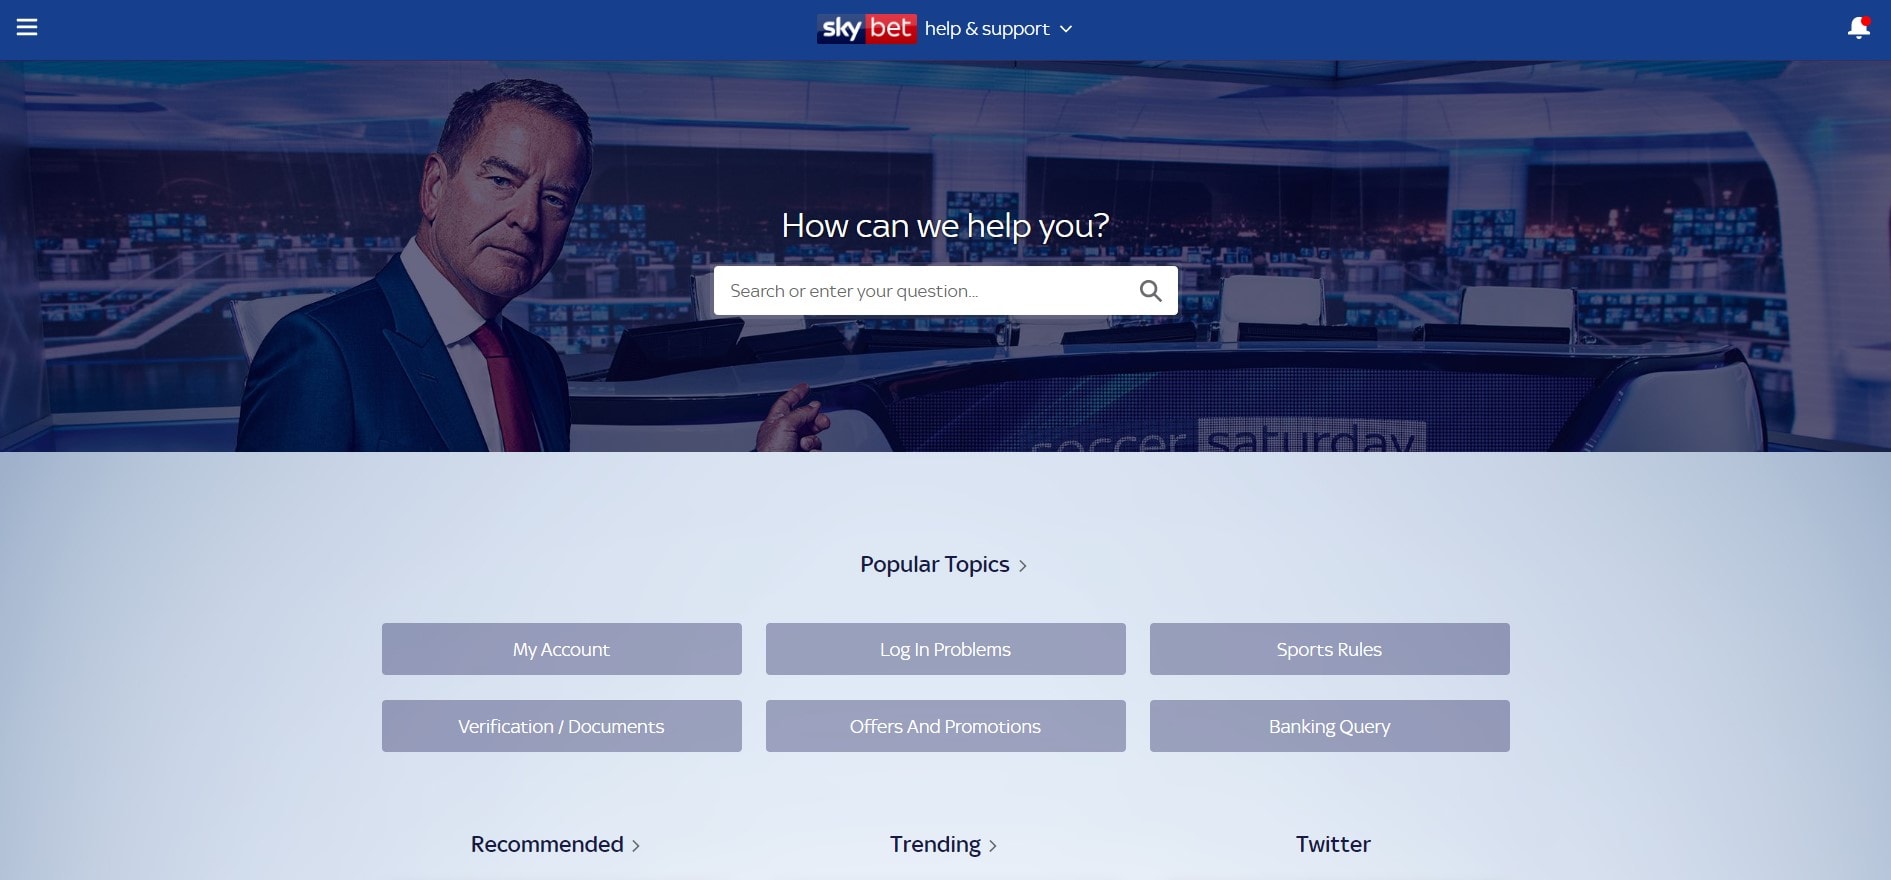 Skybet Comparison & Rating 2019 - Claim £25 or more in Freebets